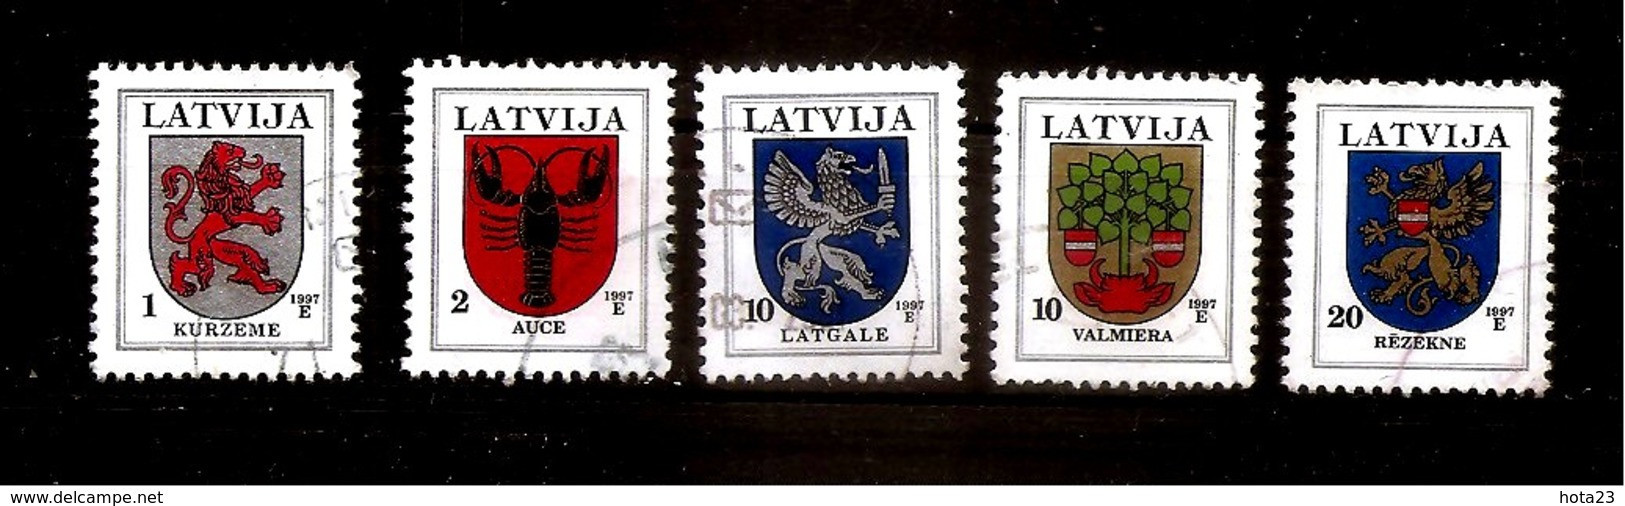 (!)  LATVIA COAT OF ARMS USED STAMPS FULL YEAR SET 1997 - Latvia